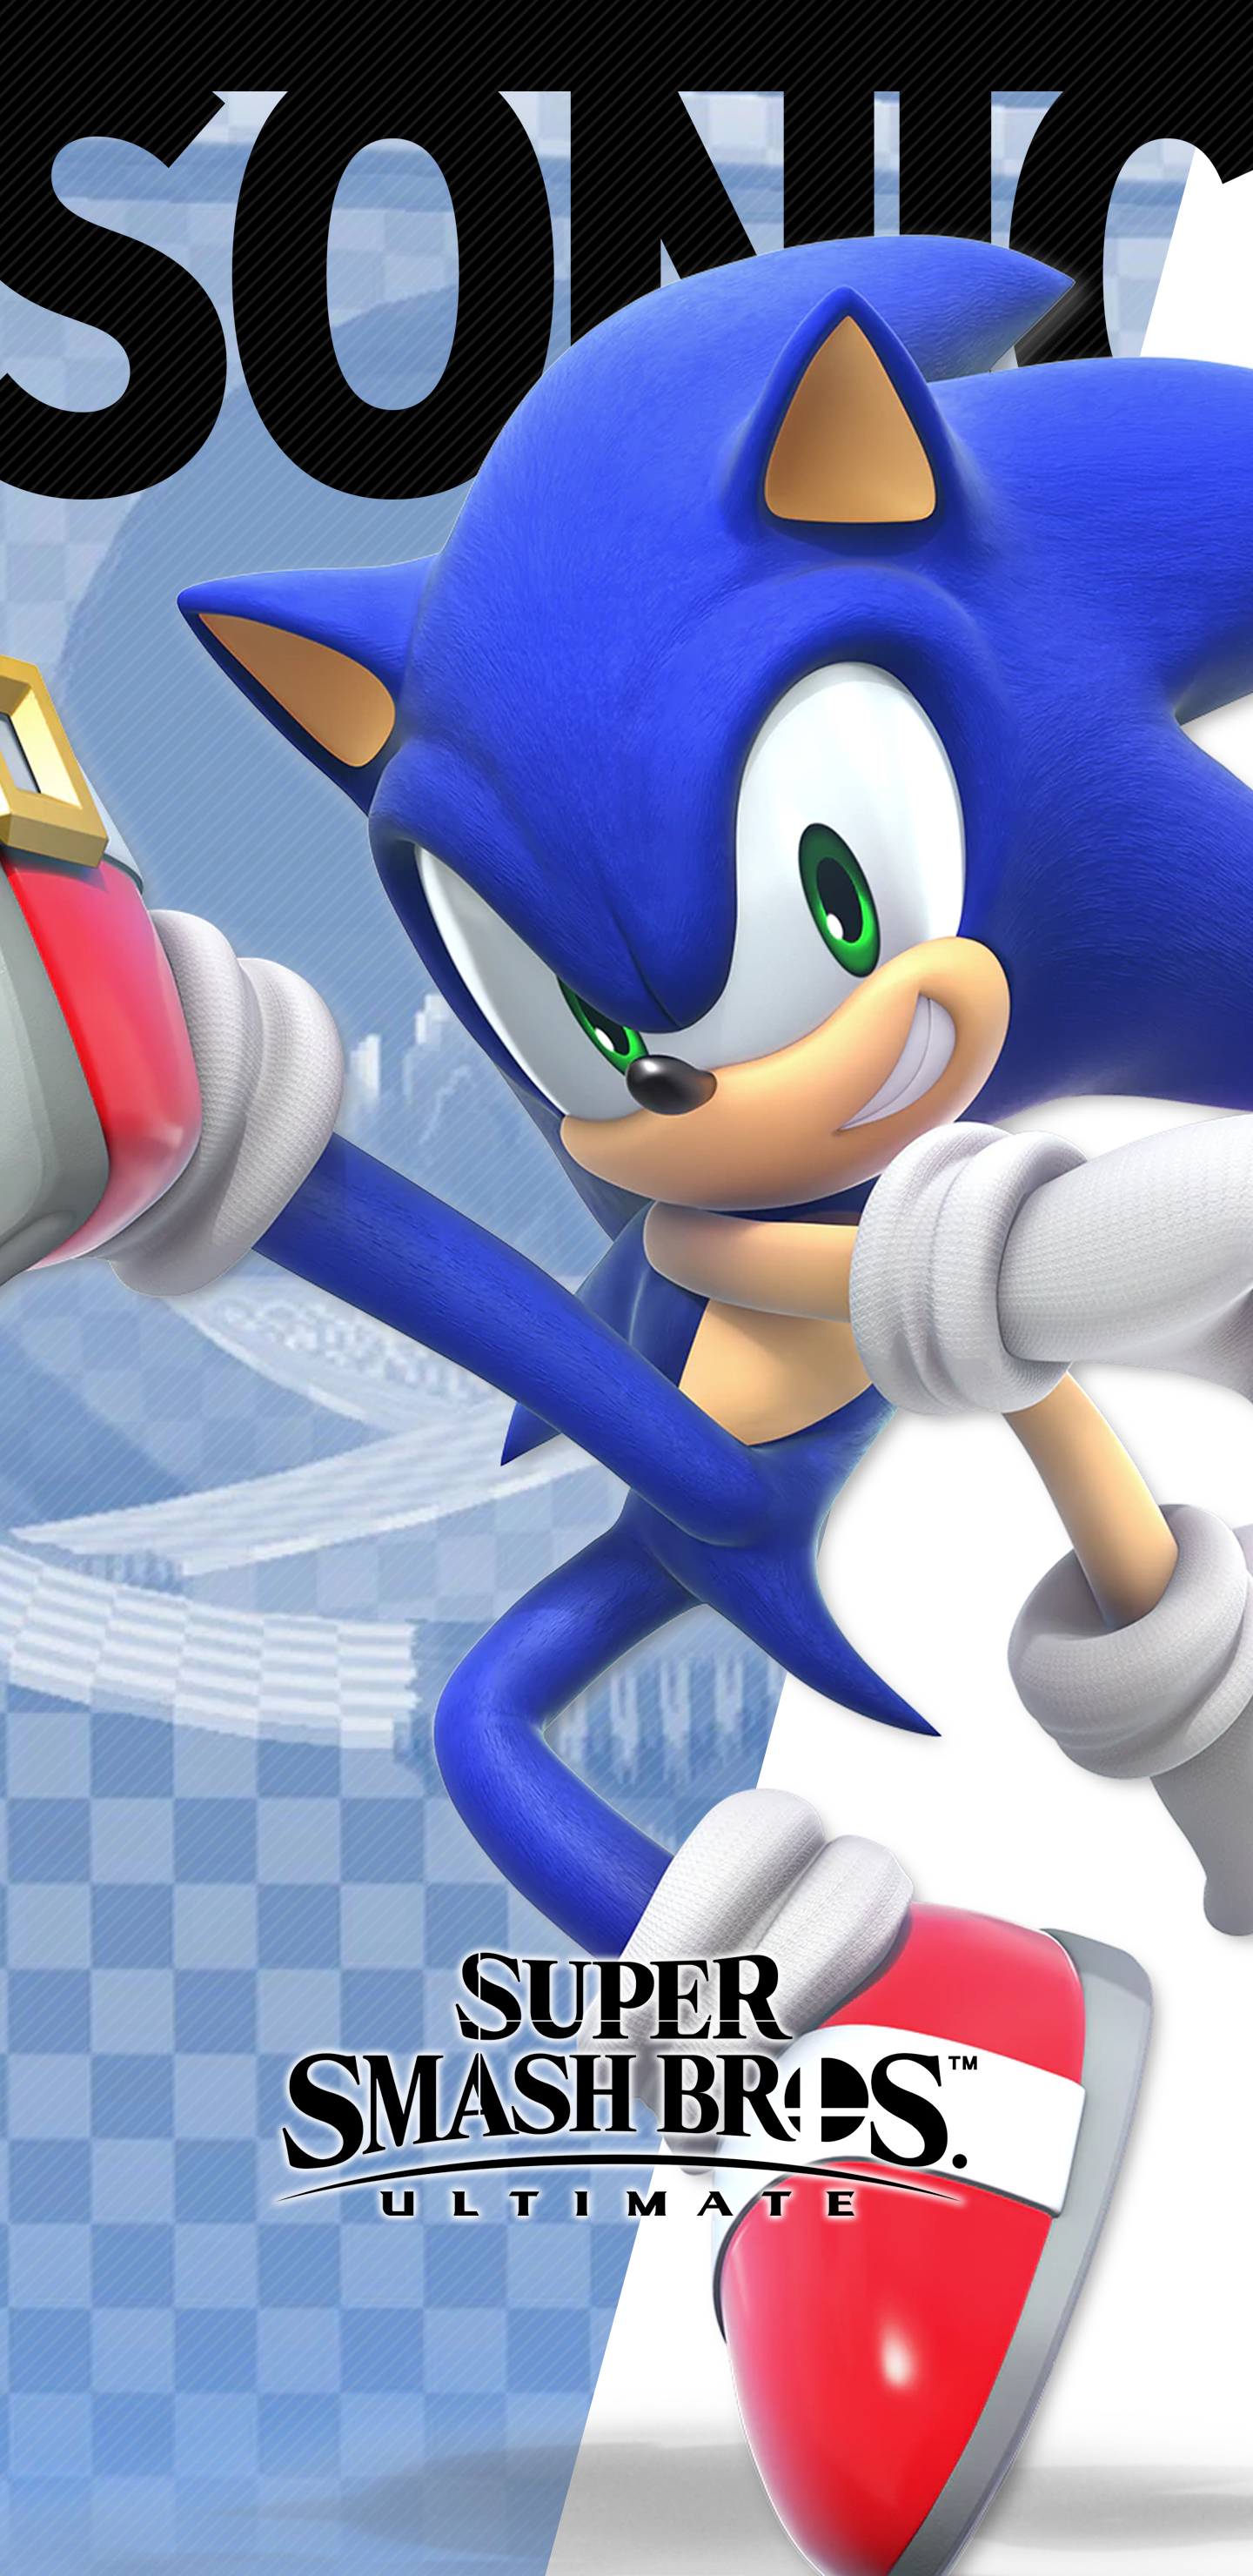 sonic phone wallpaper,sonic the hedgehog,fictional character,cartoon,action figure,games